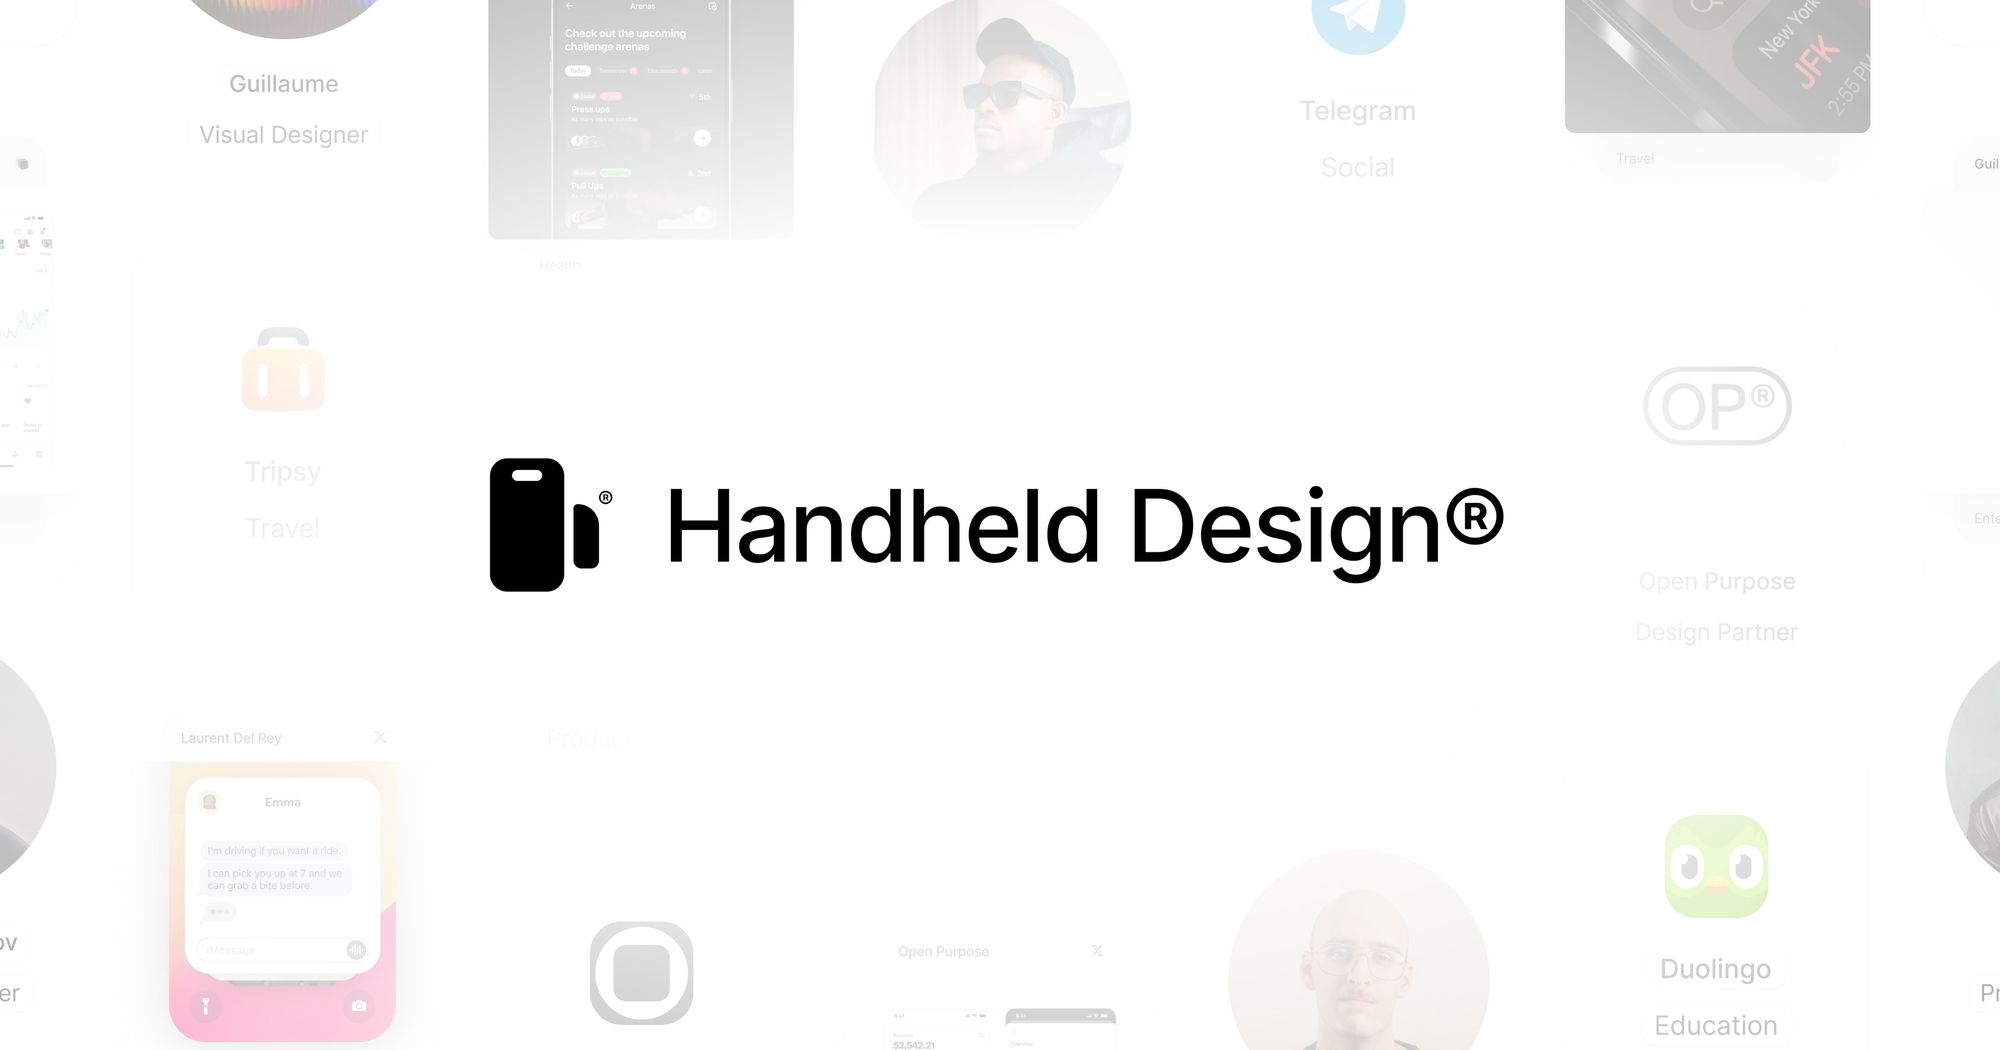 Handheld Design® - Discover best-in-class mobile design inspiration.